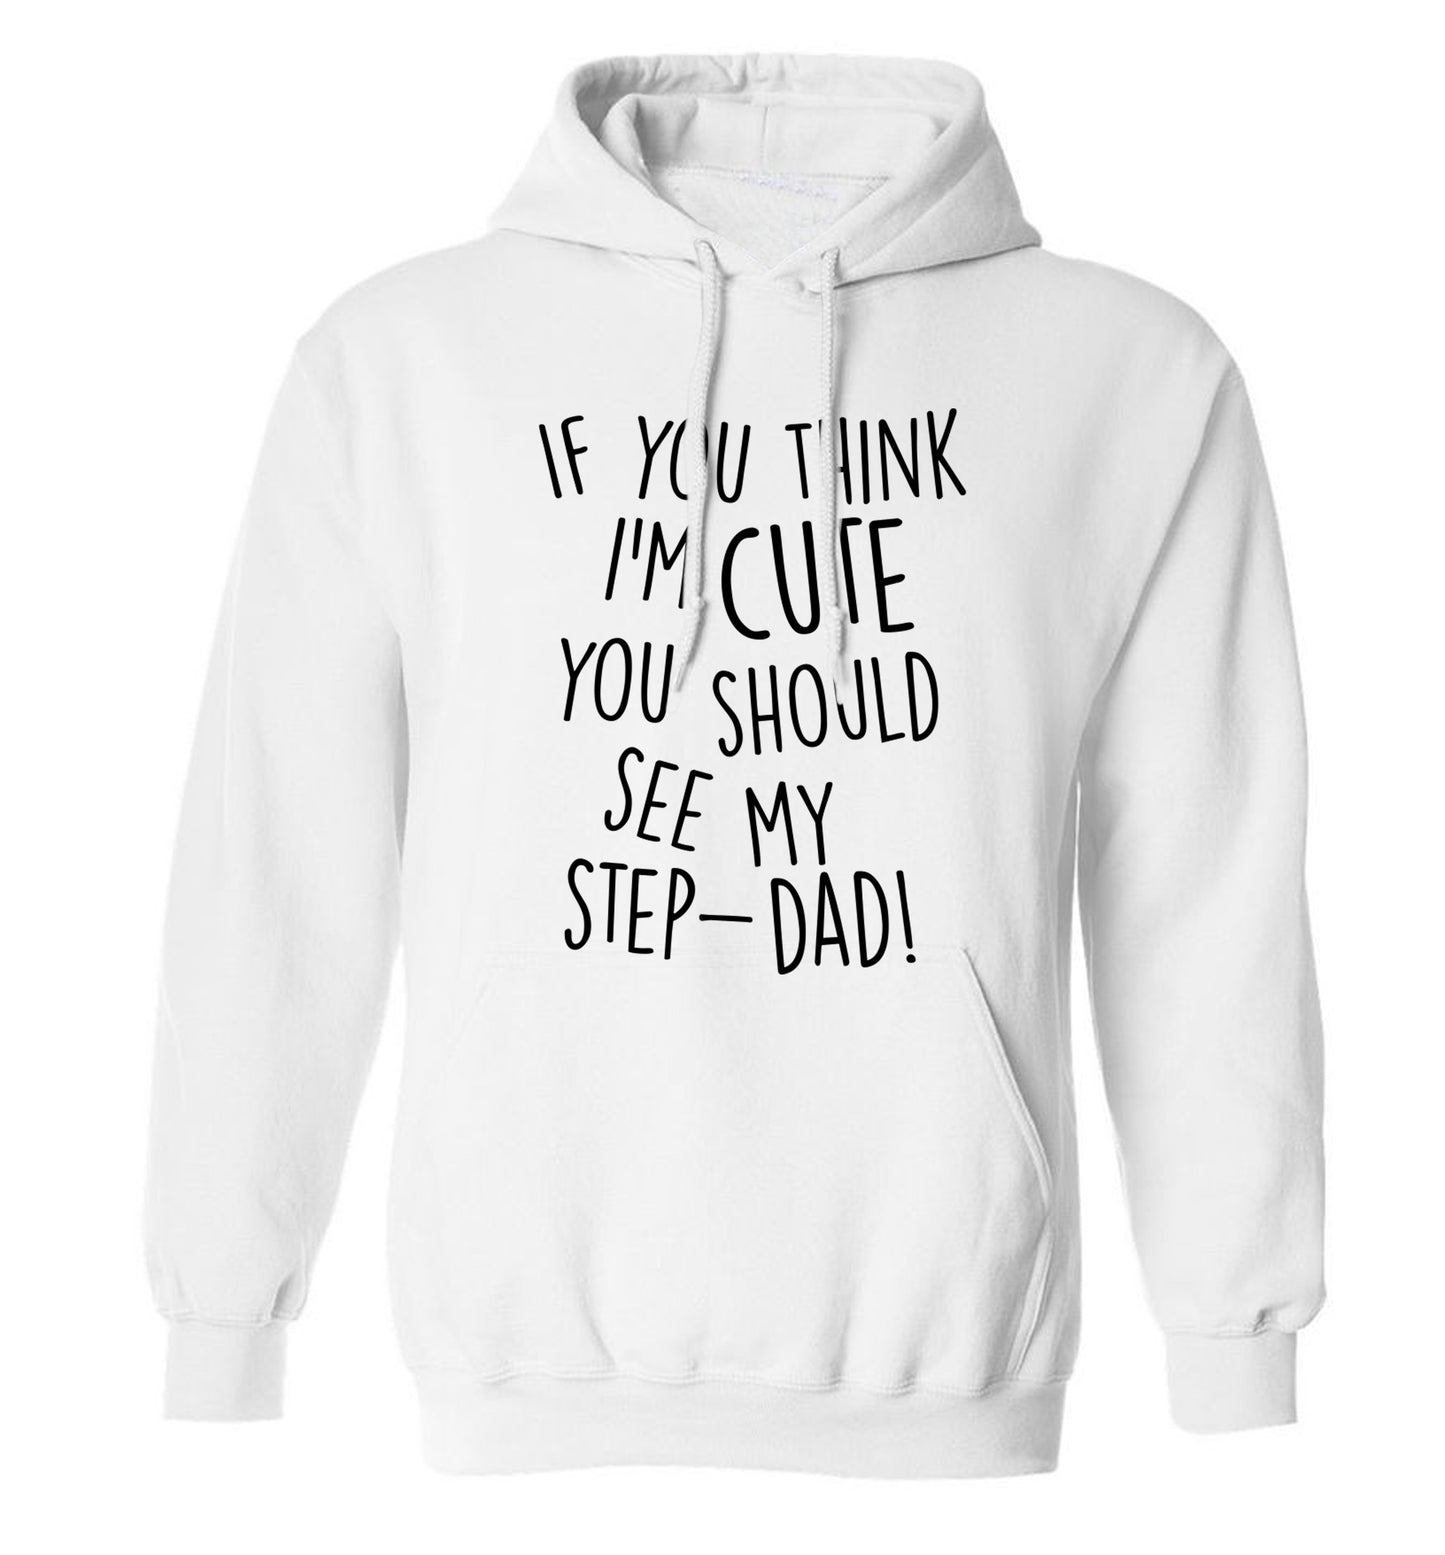 If you think I'm cute you should see my step-dad adults unisex white hoodie 2XL